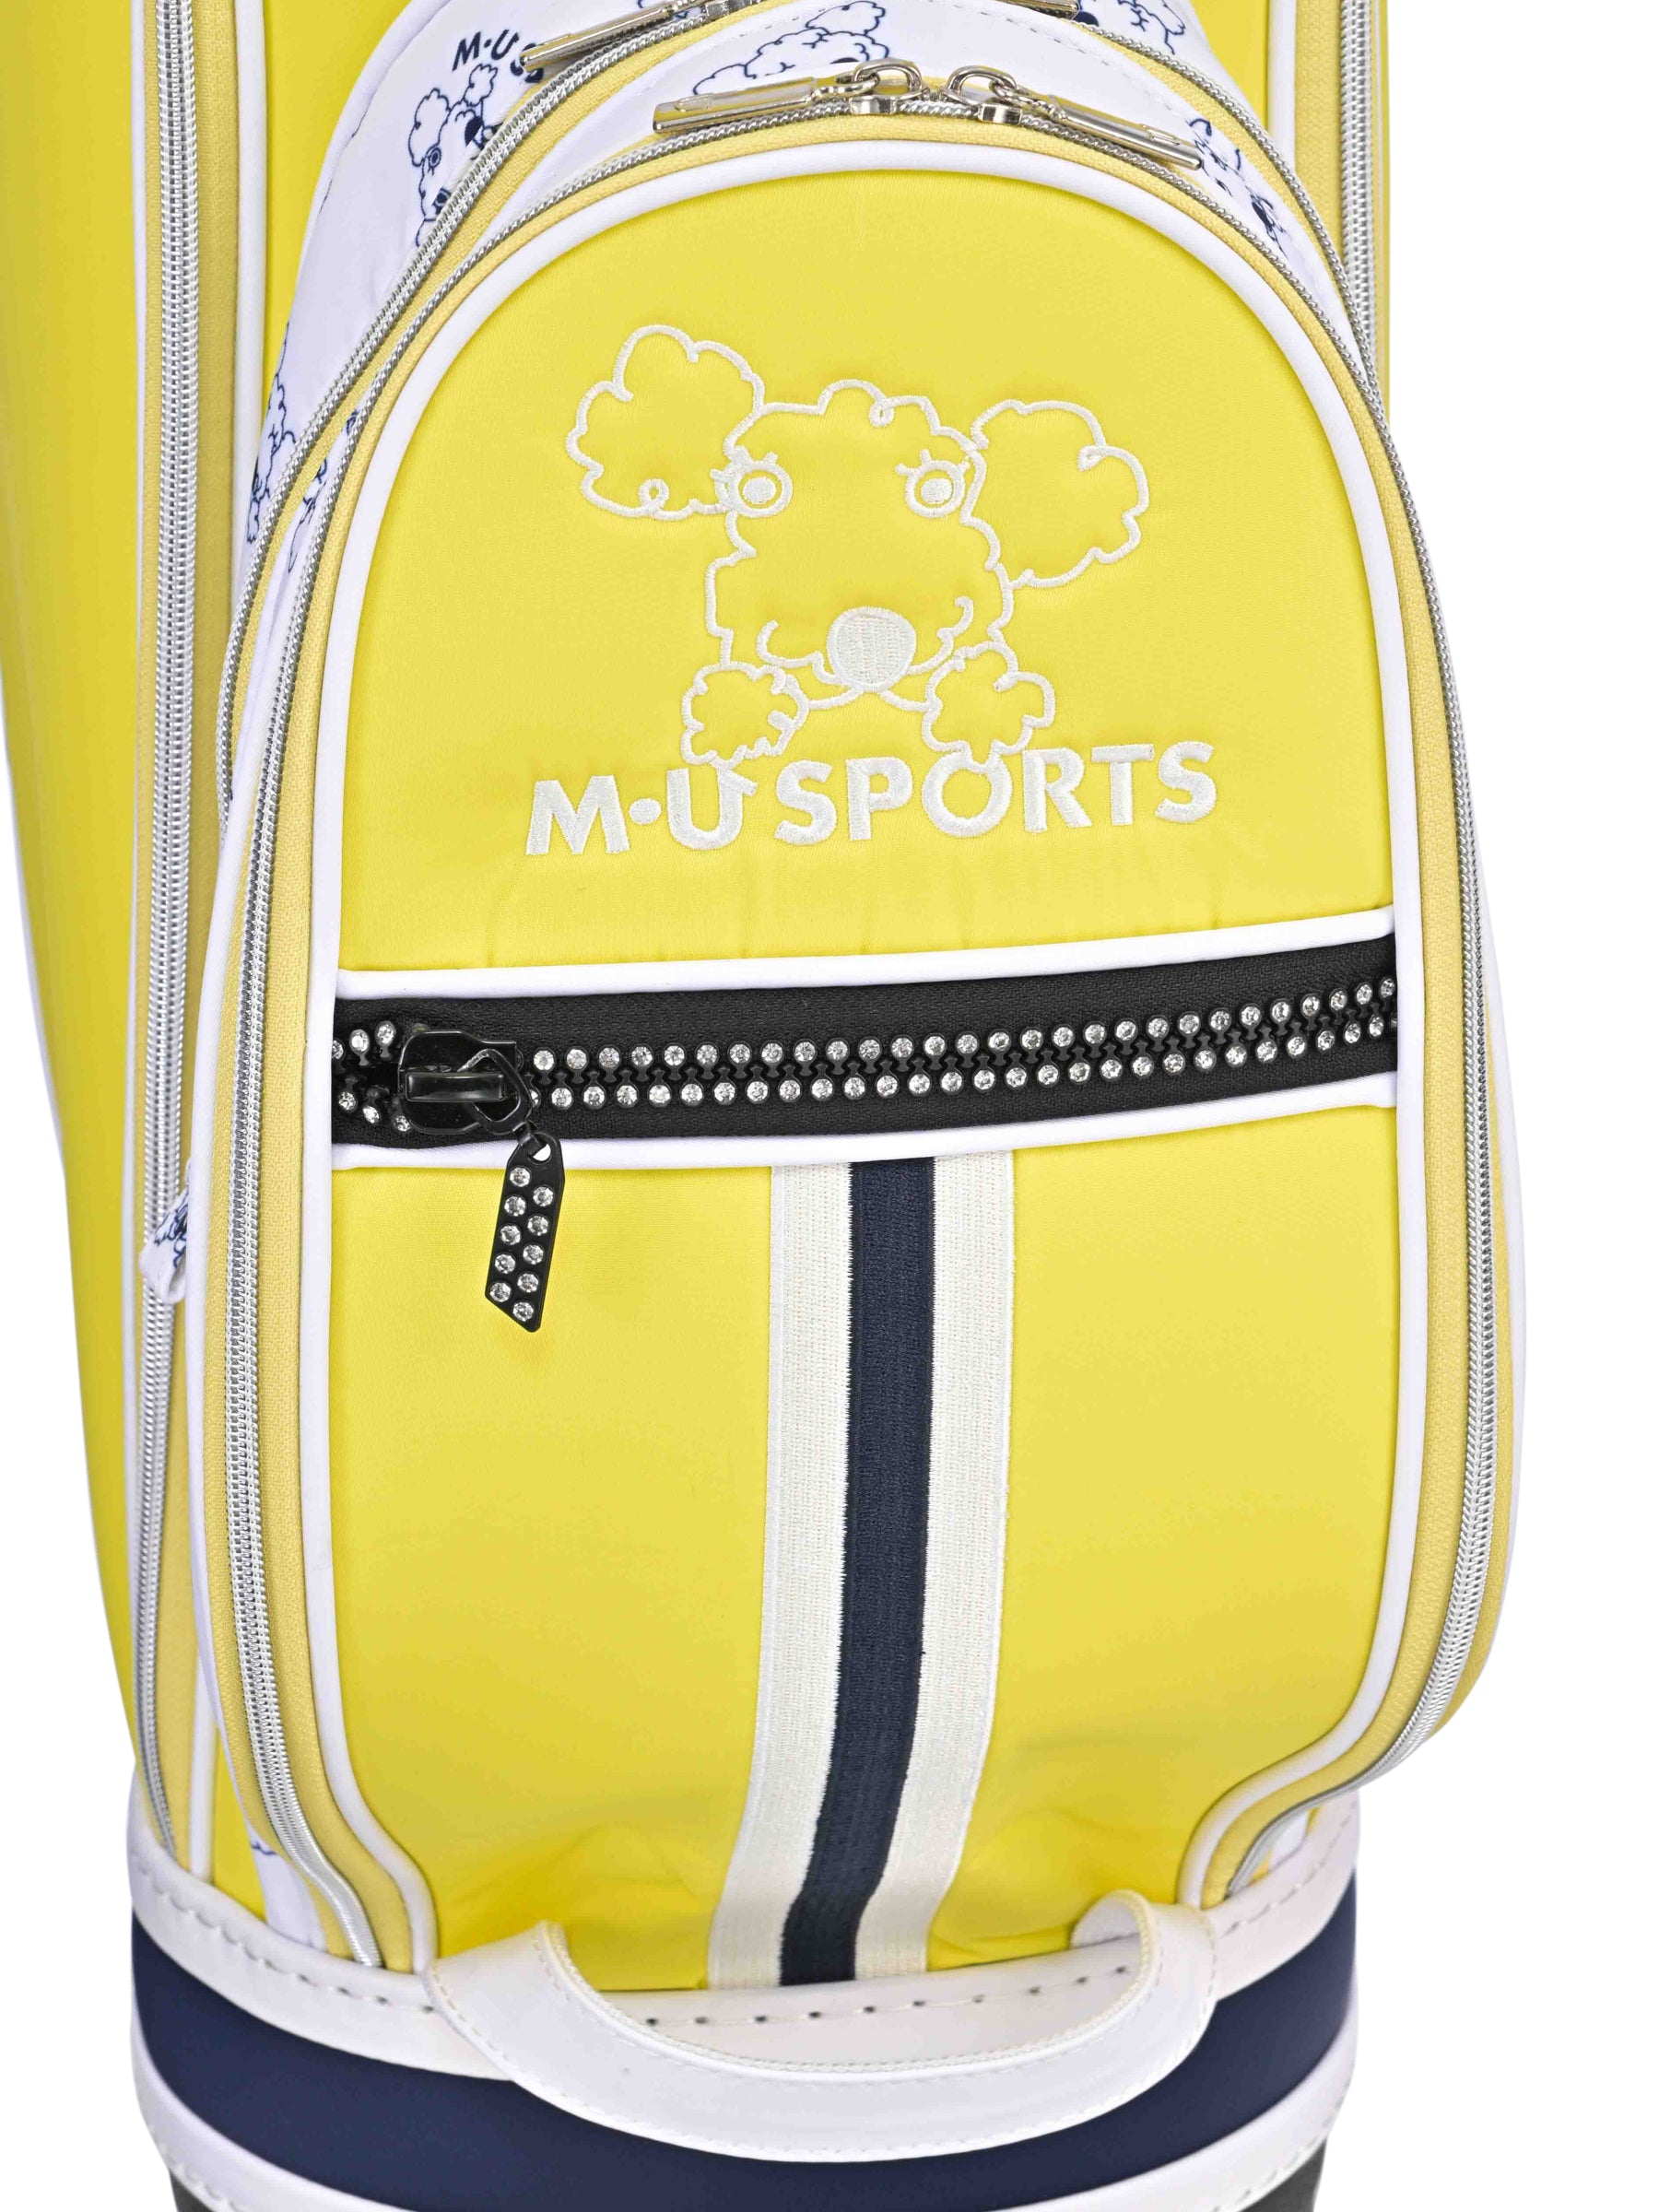 [3-piece set to choose from] Character all-over pattern series 3-piece set in selectable colors (caddie bag: yellow)